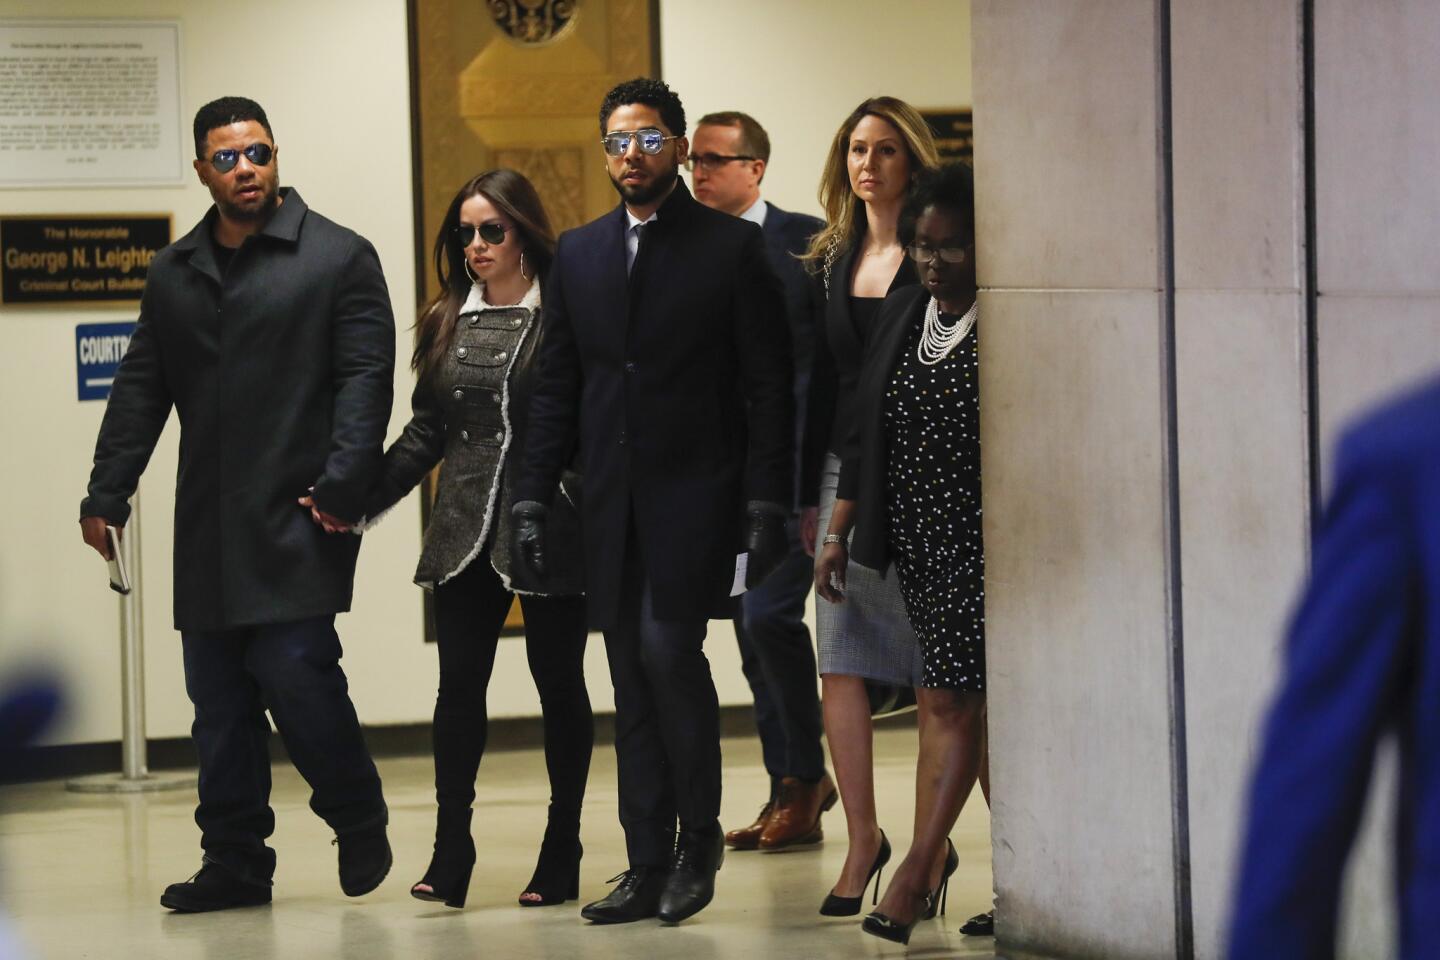 Jussie Smollett, third from left, walks out to speak to the media after all charges against him are dropped at the Leighton Criminal Court Building in Chicago on March 26, 2019.